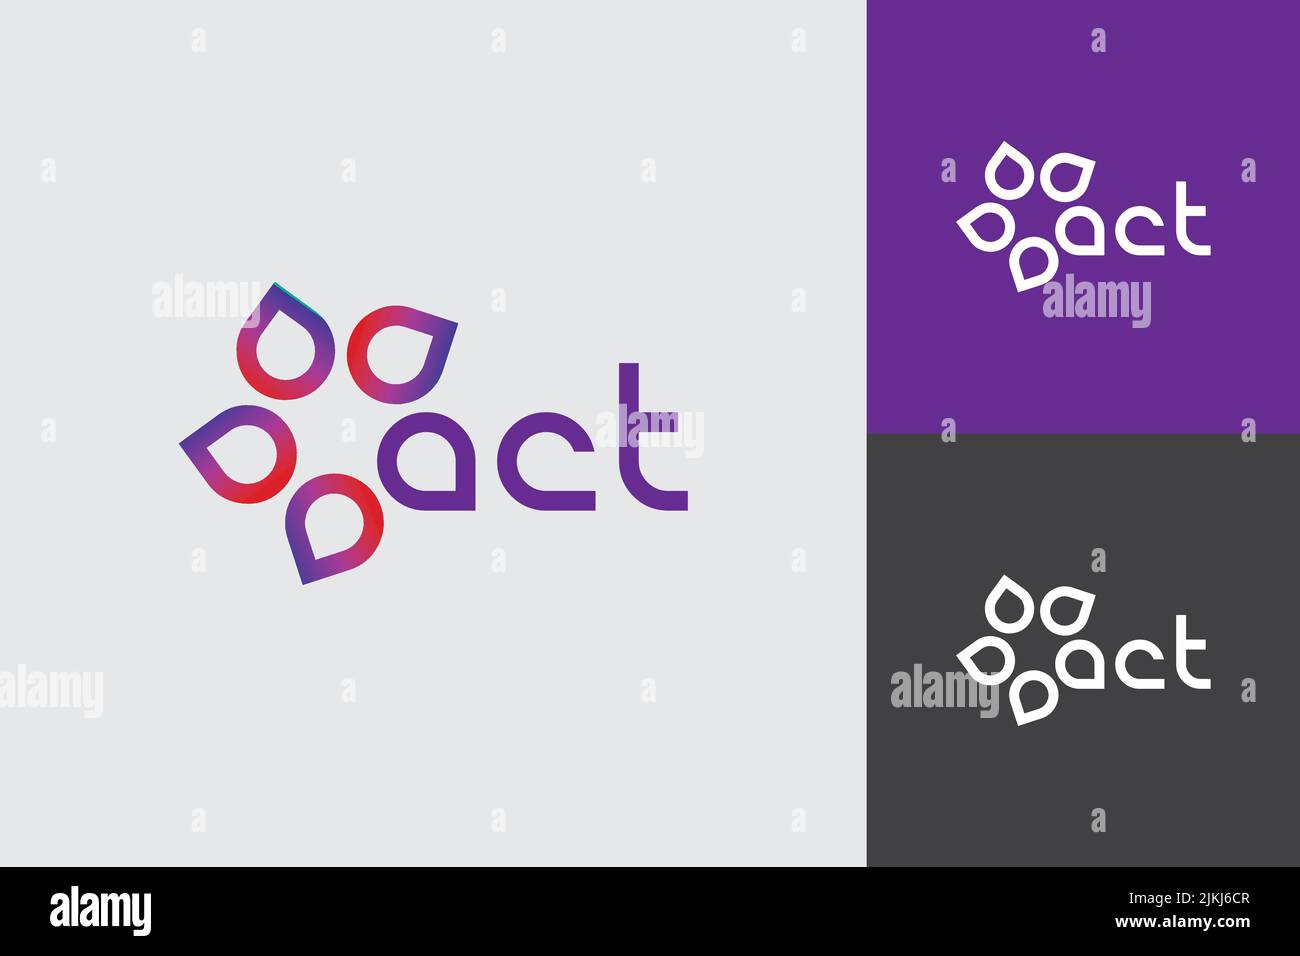 Act vector logo with floral graphics purple and red color combination Stock Vector